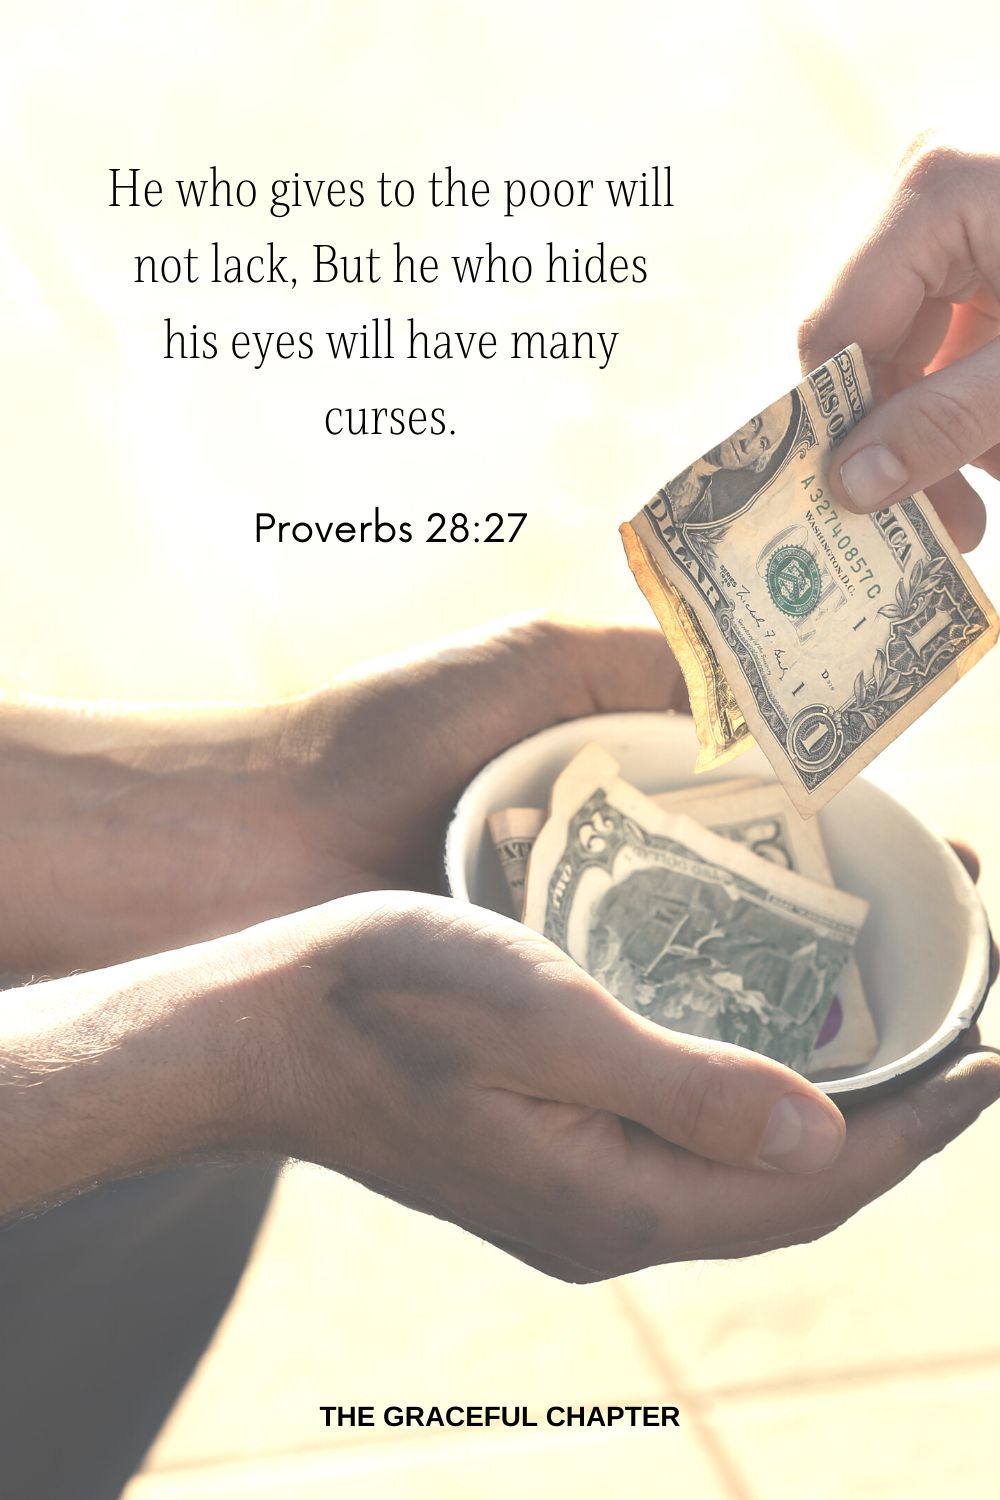 He who gives to the poor will not lack, But he who hides his eyes will have many curses. Proverbs 28:27 Bible Verses About Giving